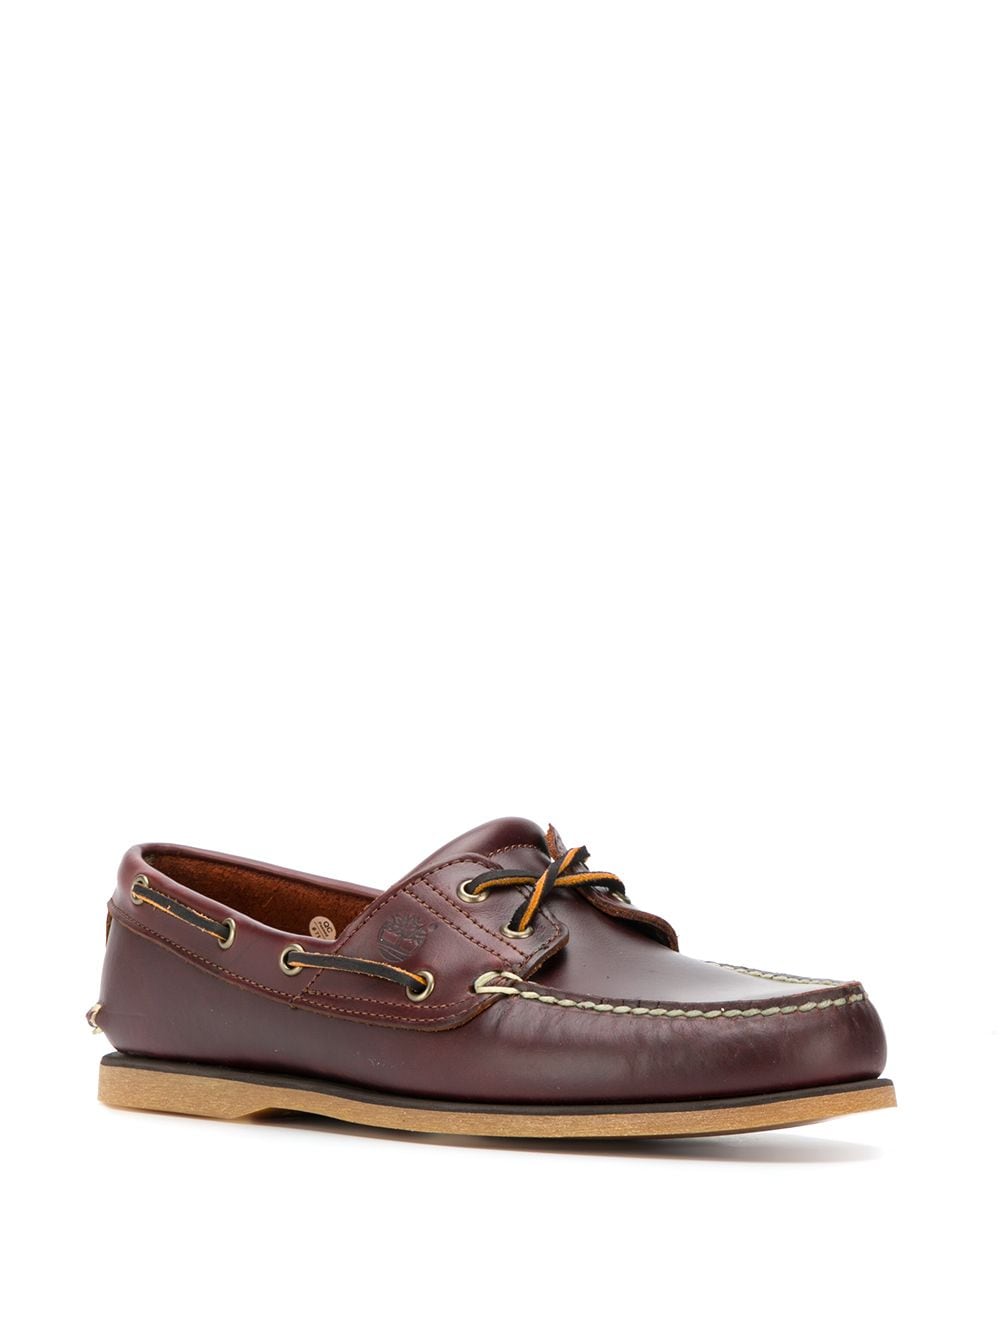 Brown leather and rubber classic boat shoes